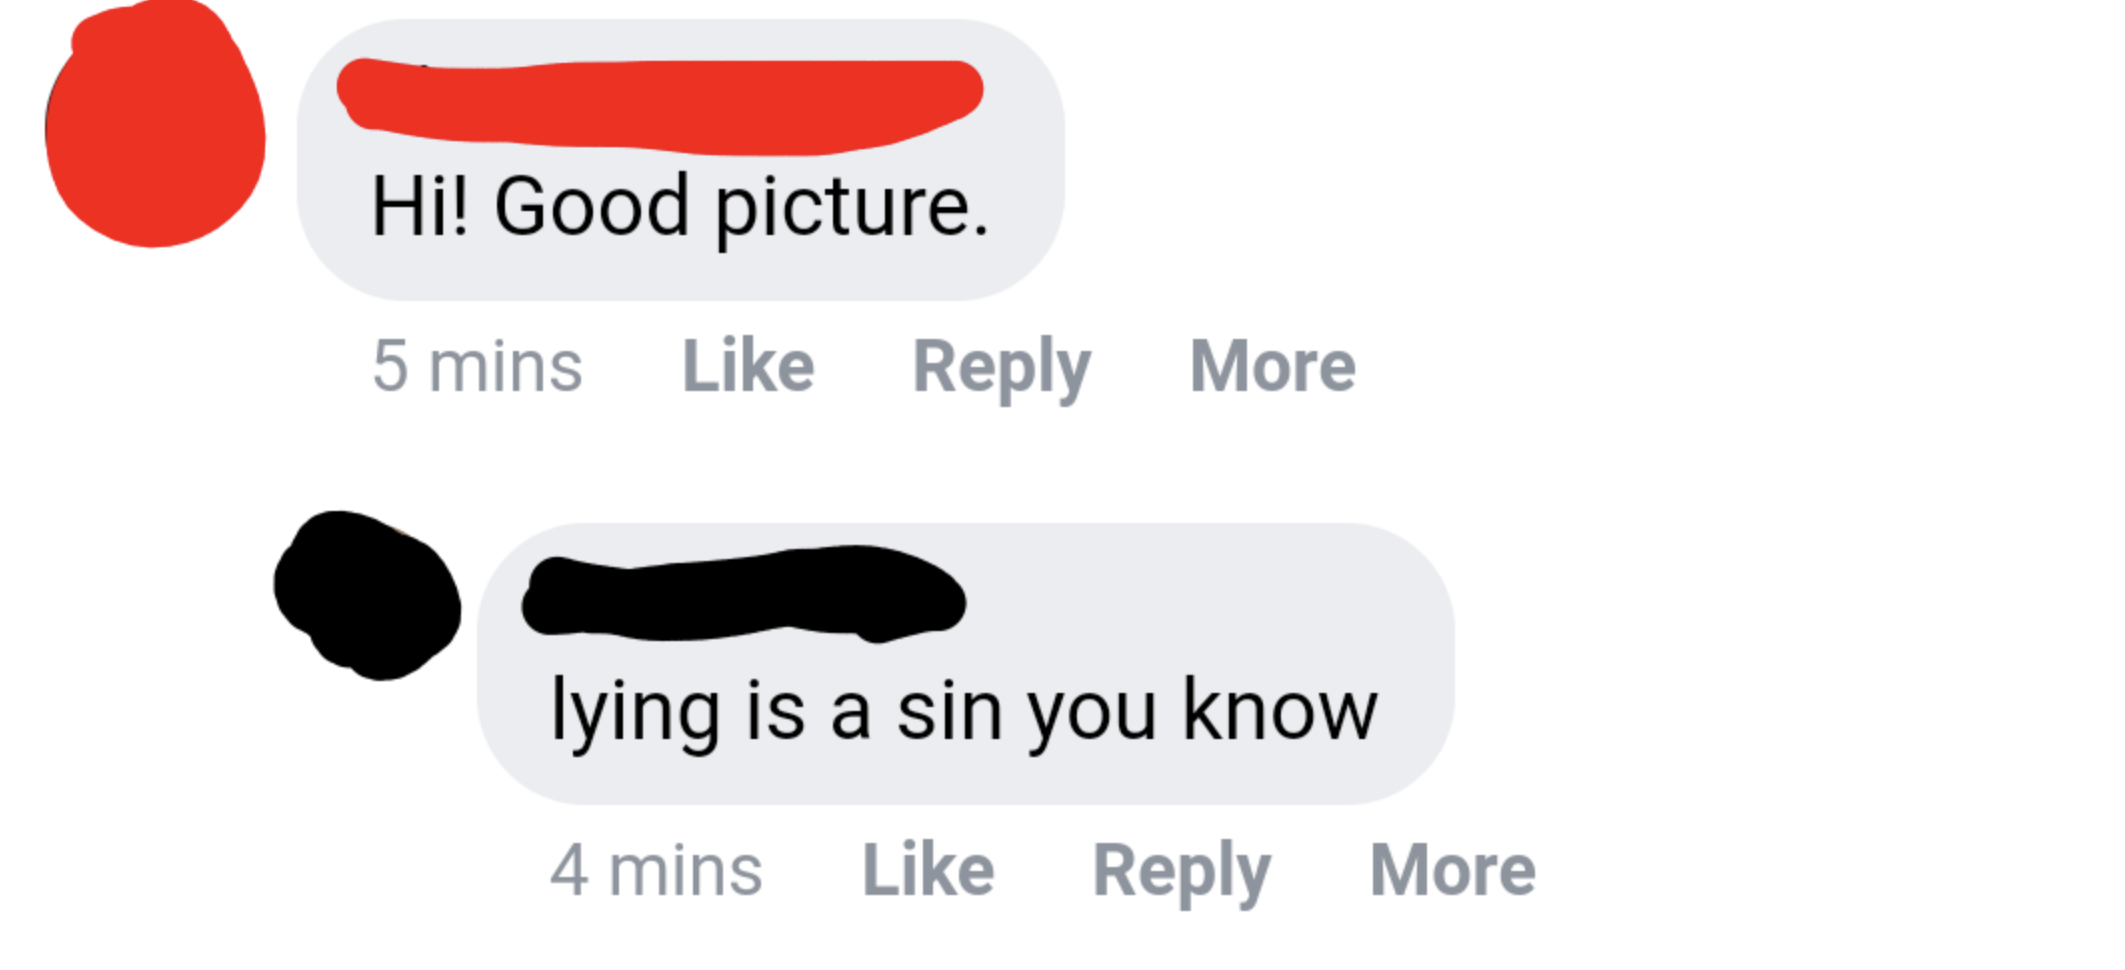 Someone says Hi, Good picture. Grandpa replies, Lying is a sin you know